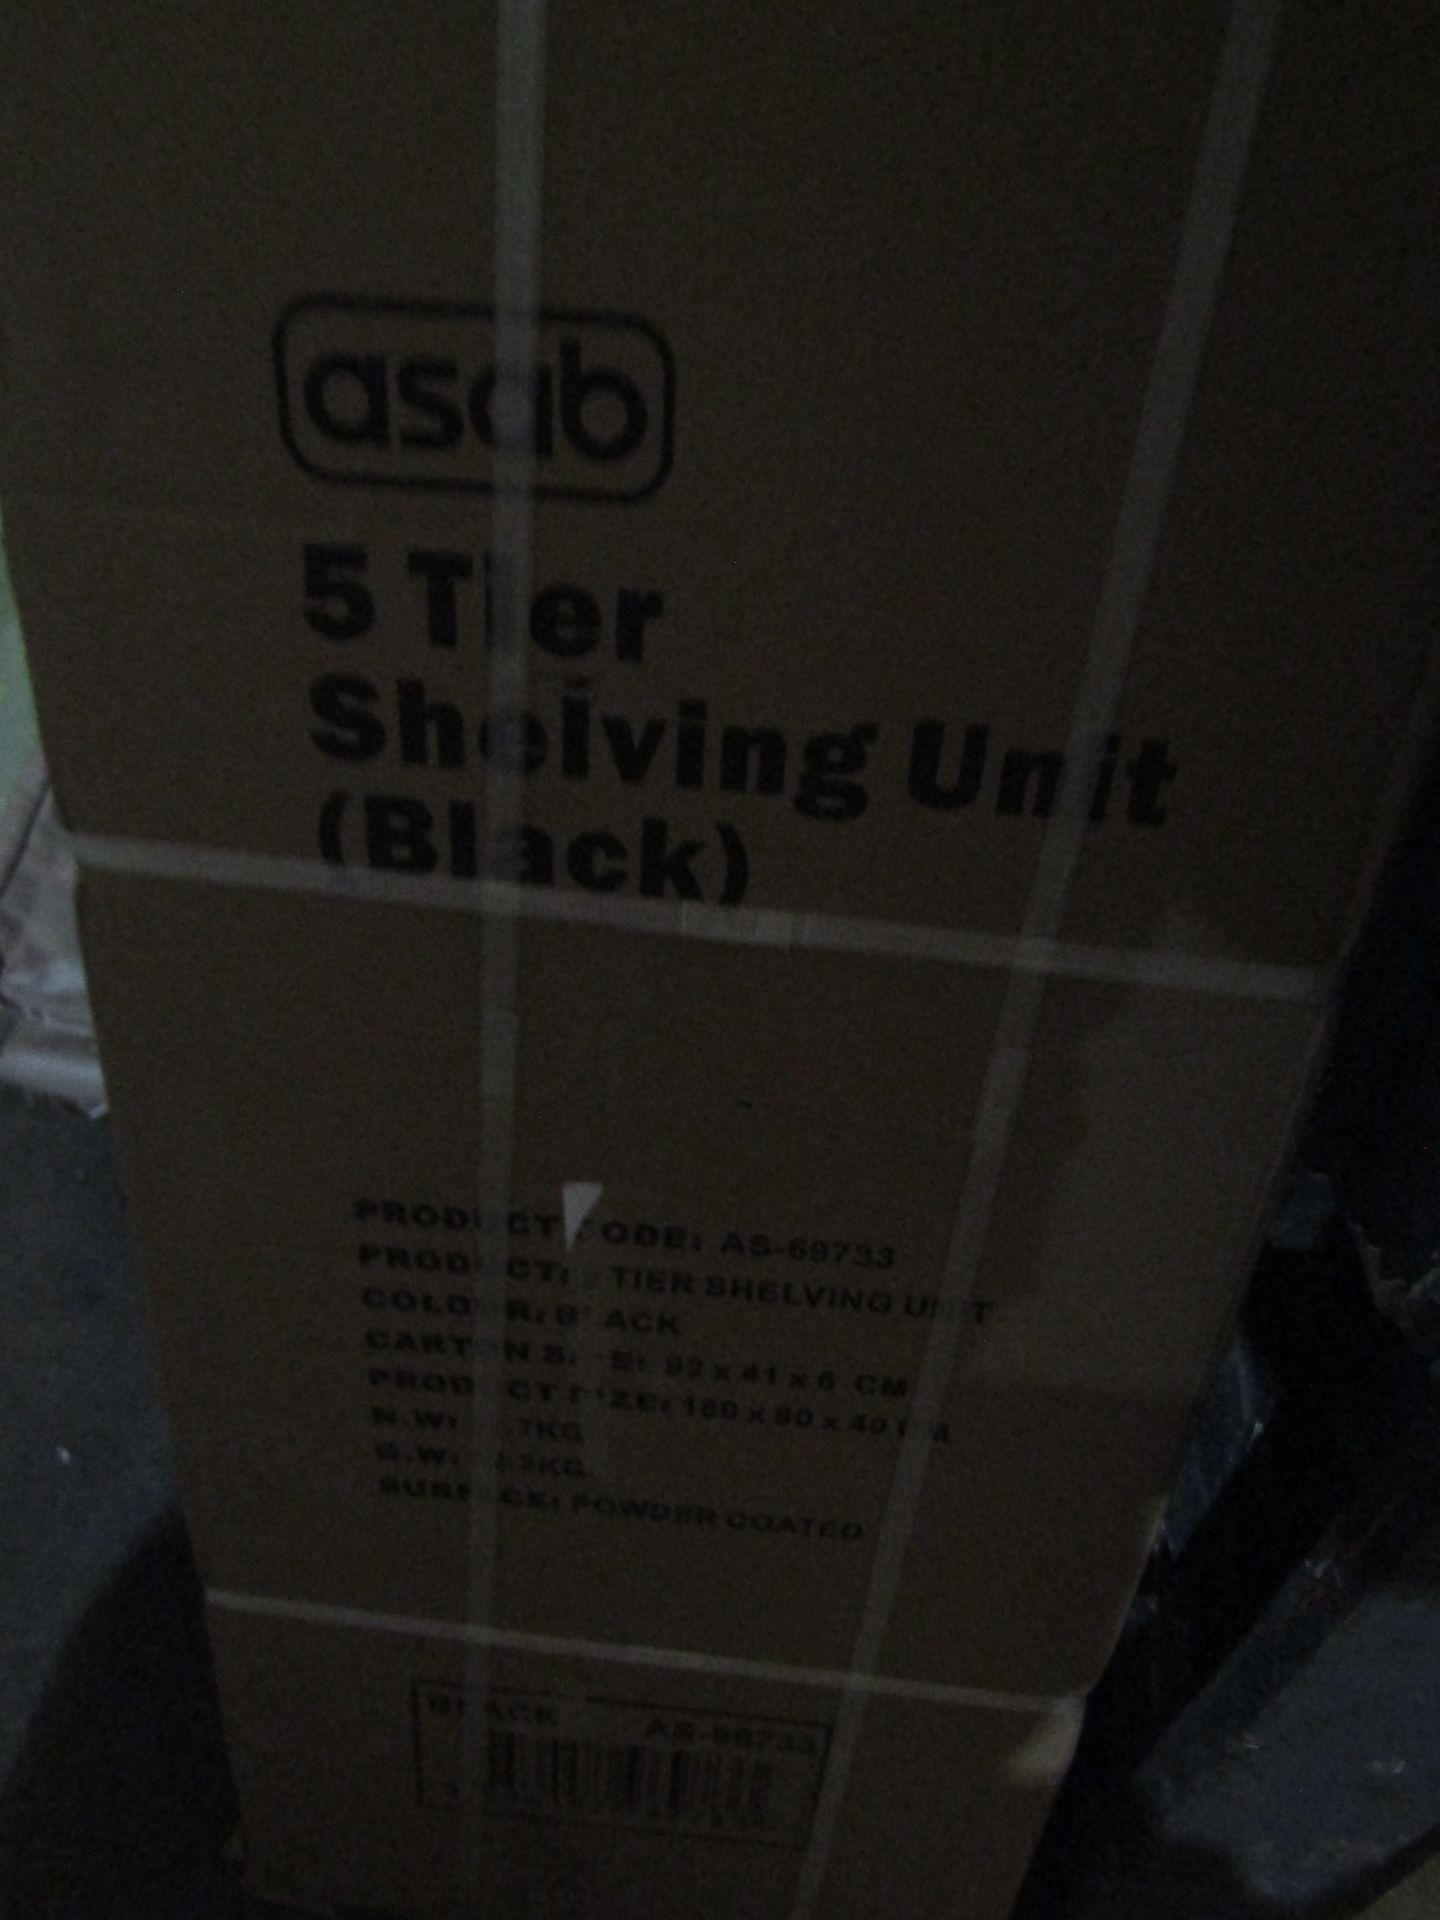 Asab 5 Tier Shelving Unit, Black, Unchecked & Boxed.